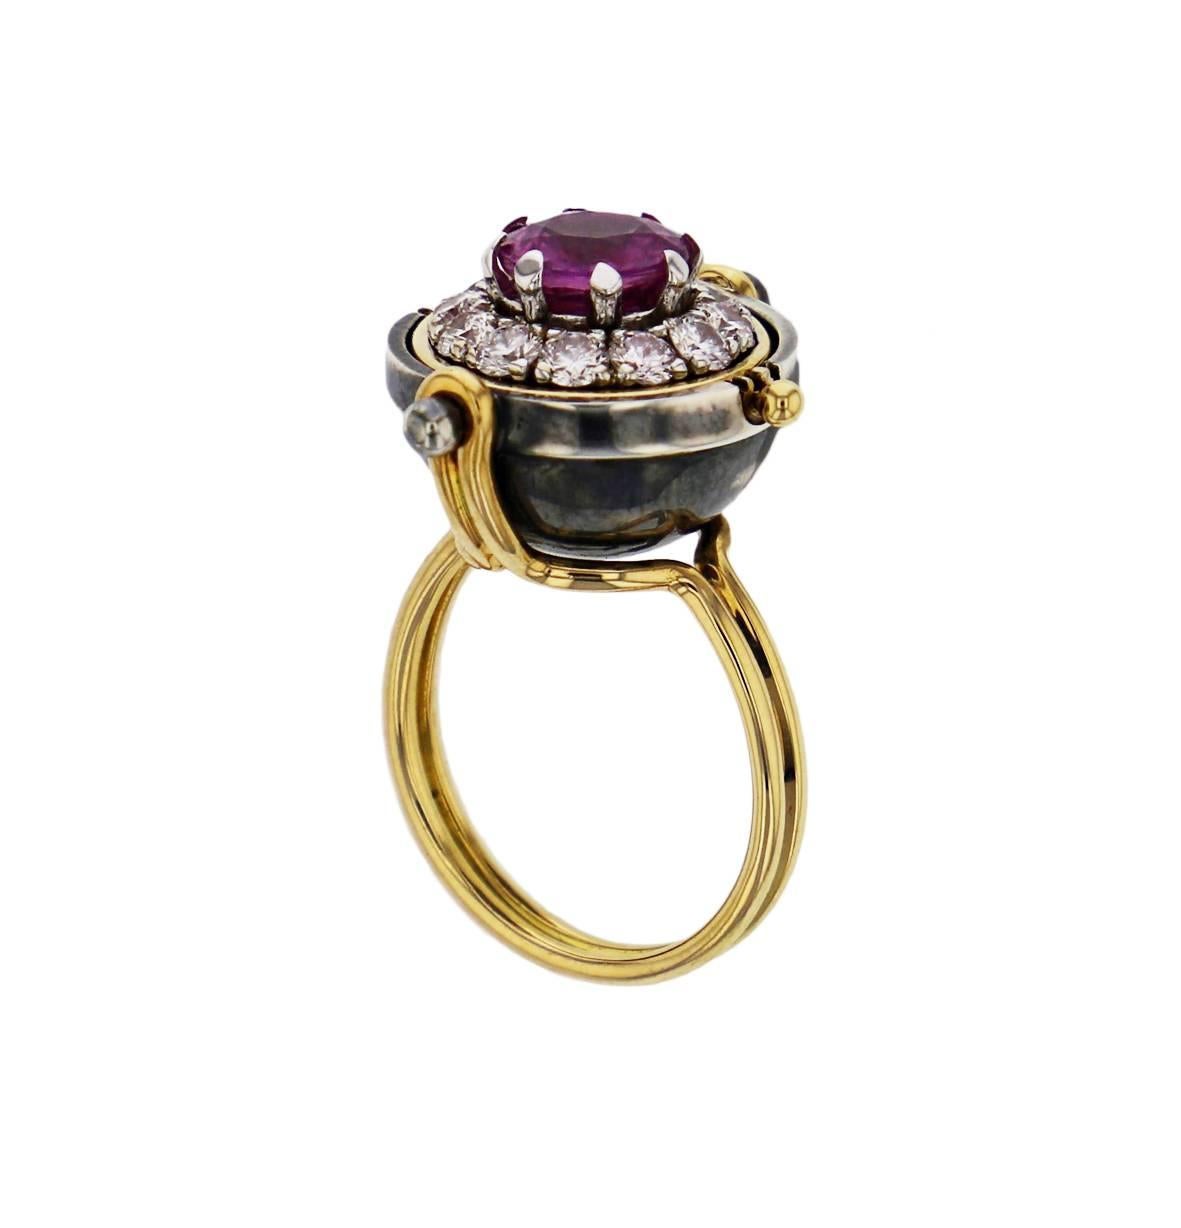 Elie Top Mécaniques Célestes Bague Sirius Sphere Or Saphir rose Diamants

A mobile patinated silver half-sphere, mounted on a patinated yellow gold rail, opens up to reveal a cushion-cut amethyste surrounded by diamonds.

Demi-sphère d'argent patiné